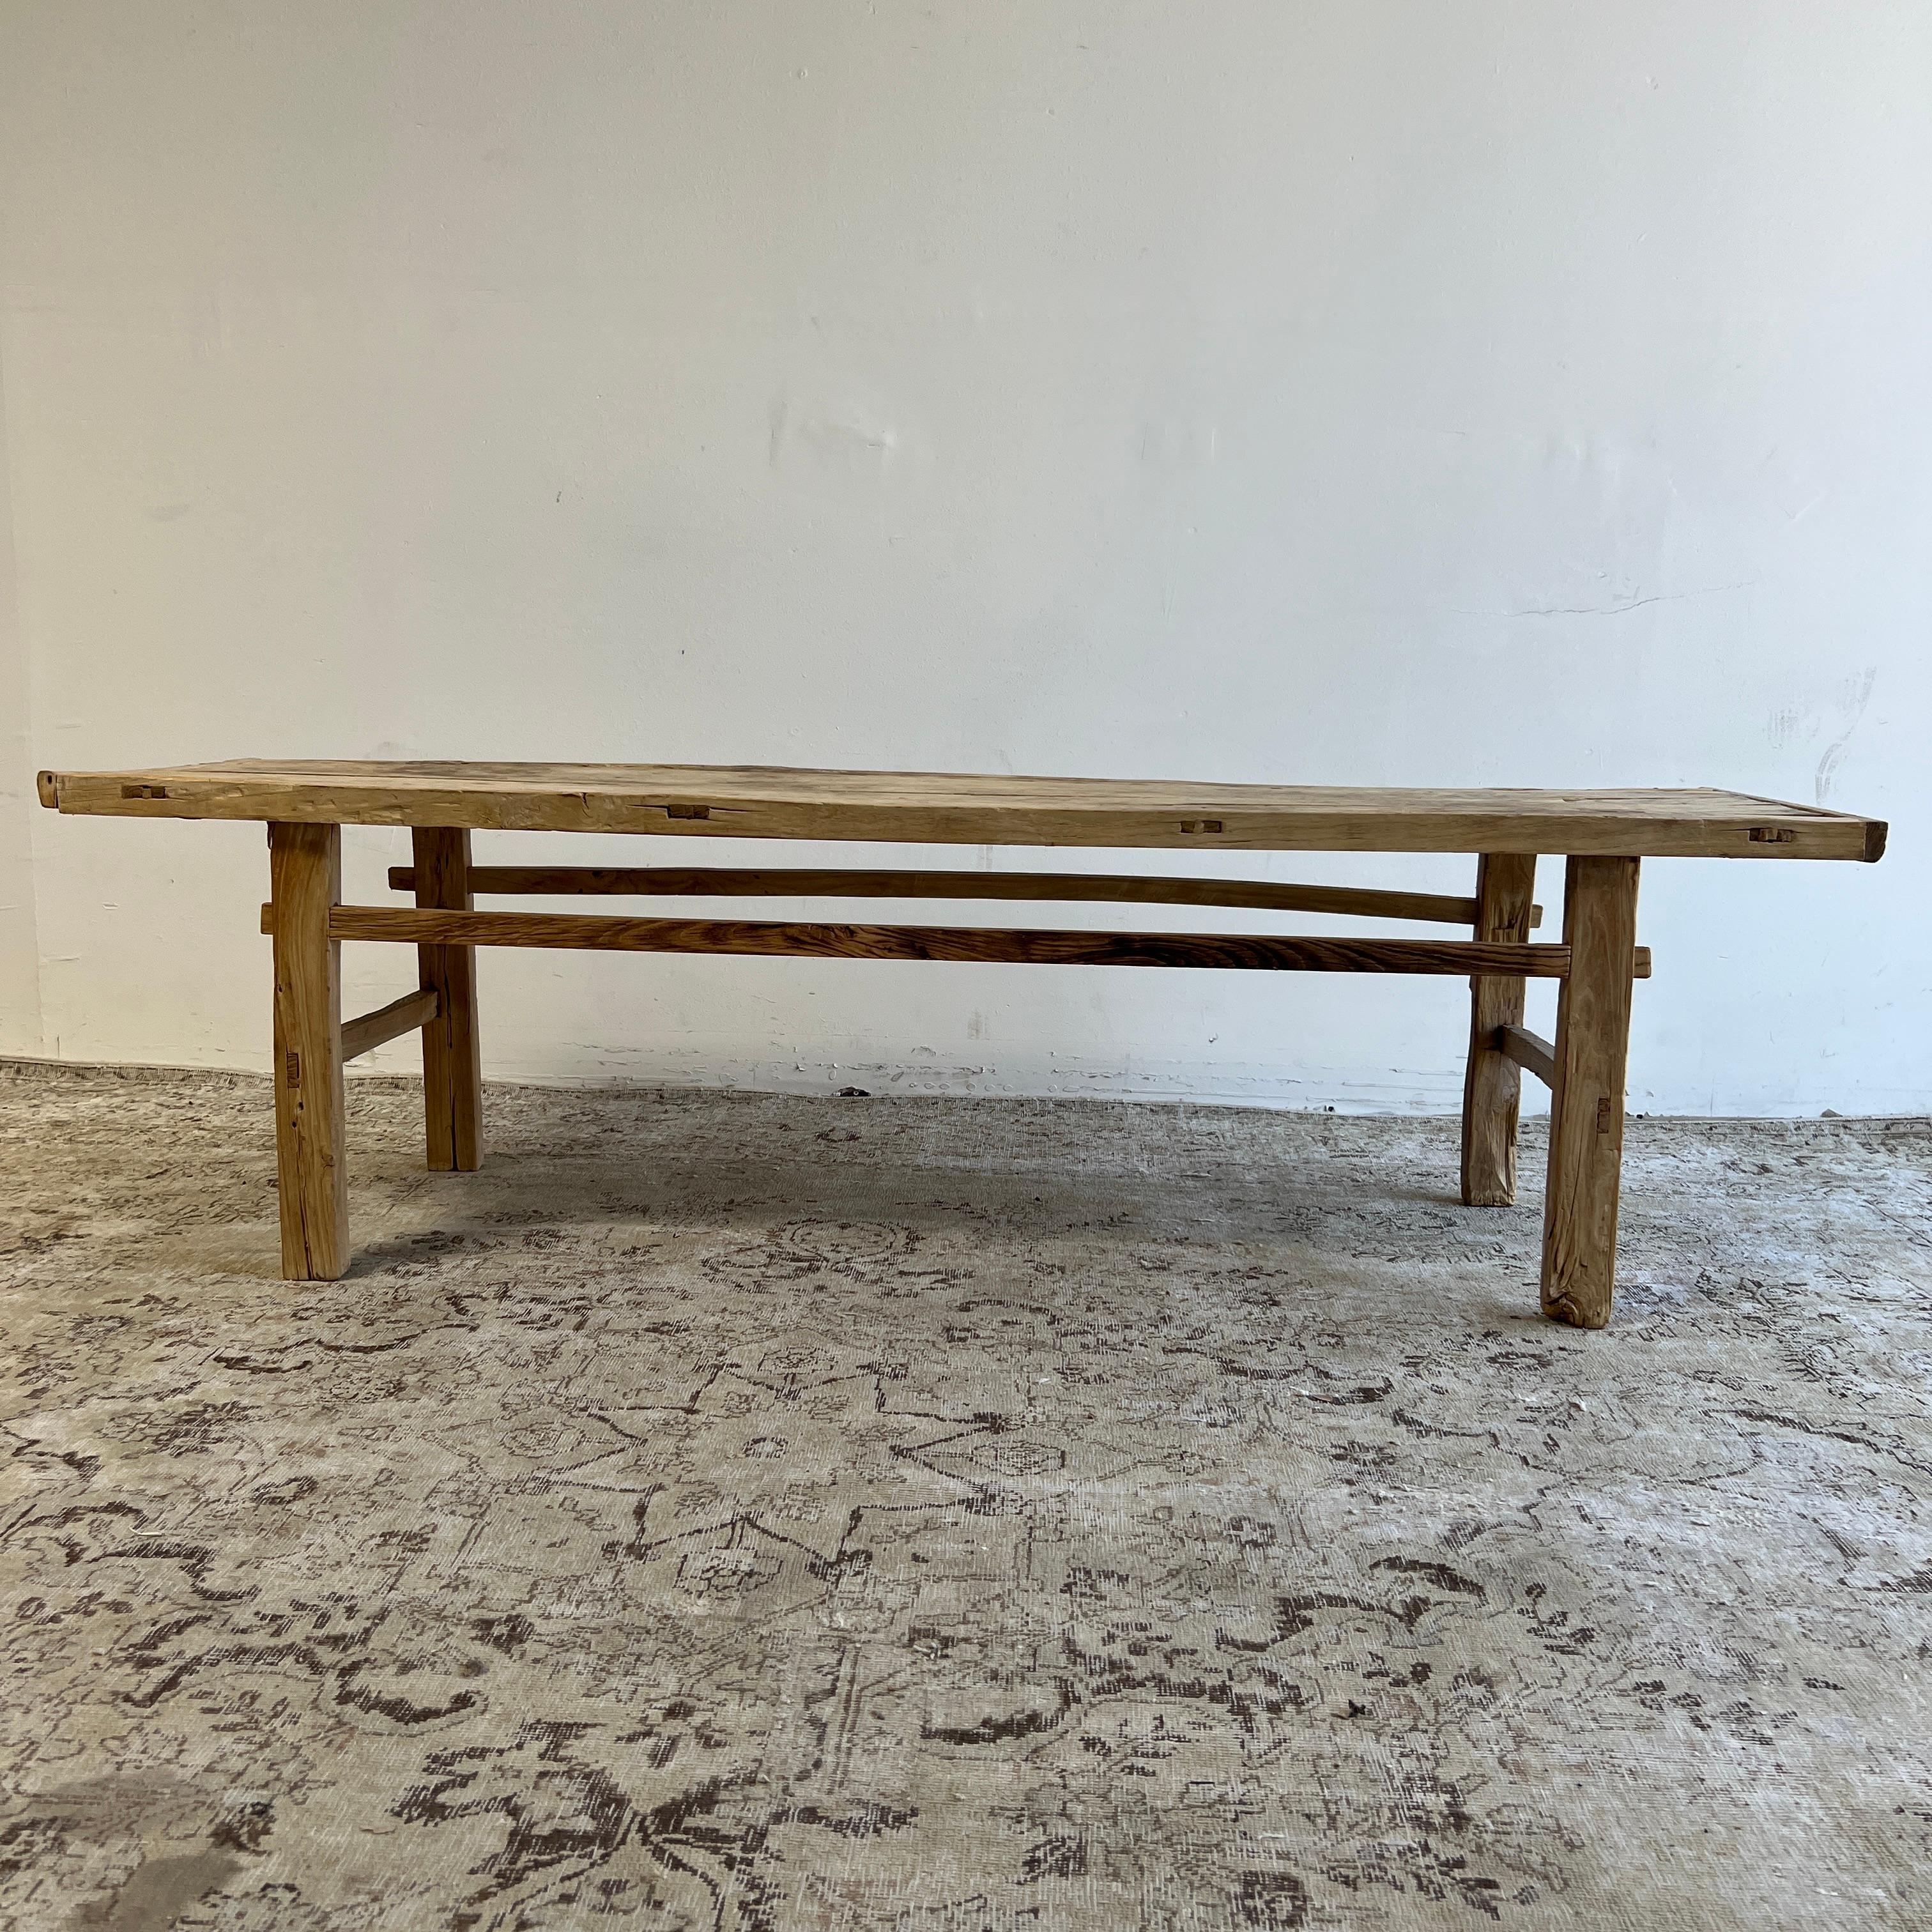 Beautiful antique patina, with weathering and age, these are solid and sturdy ready for daily use, use as as a table behind a sofa, stool, coffee table, they are great for any space. Each piece is truly unique and one of a kind with different